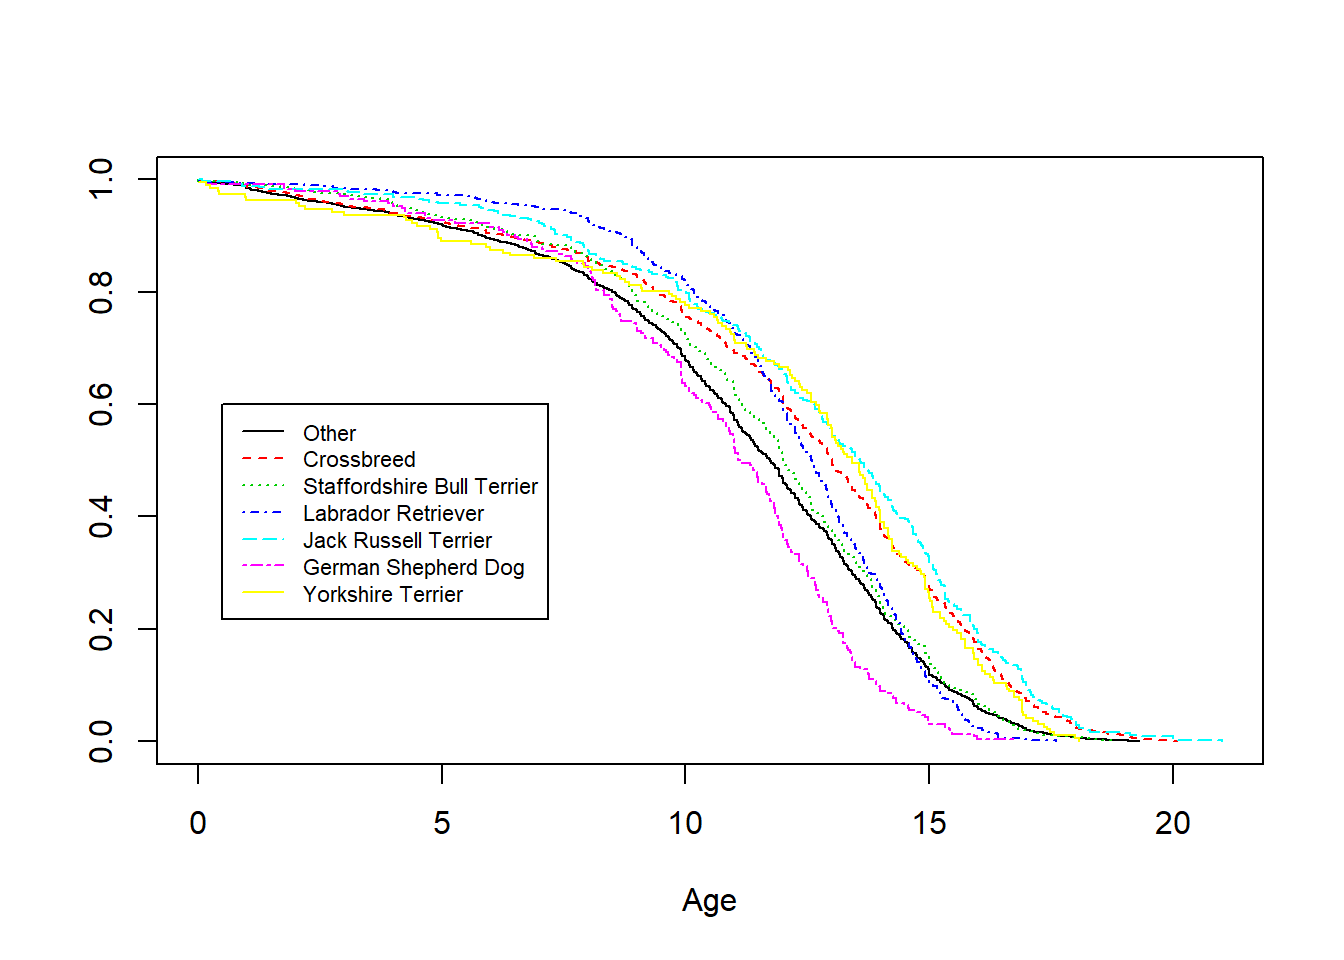 Survival Distributions by Breed